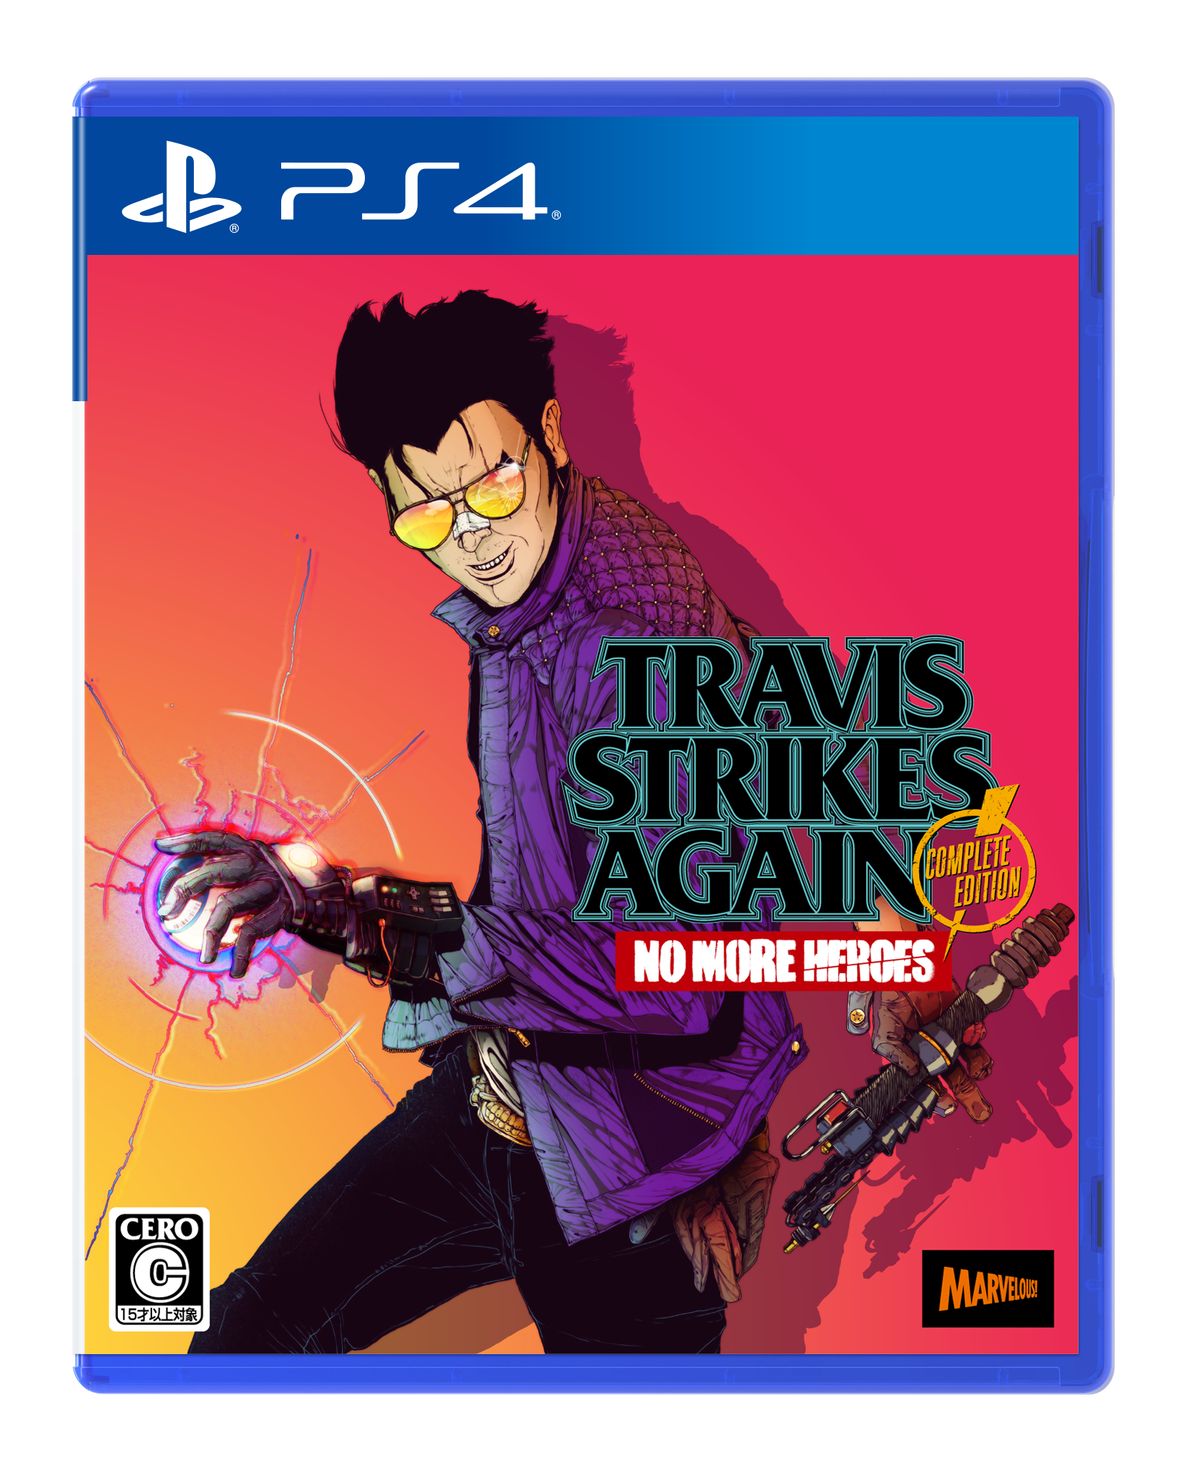 Ps4 Steam版殺し屋アクション Travis Strikes Again No More Heroes Complete Edition 発売開始 アキバ総研